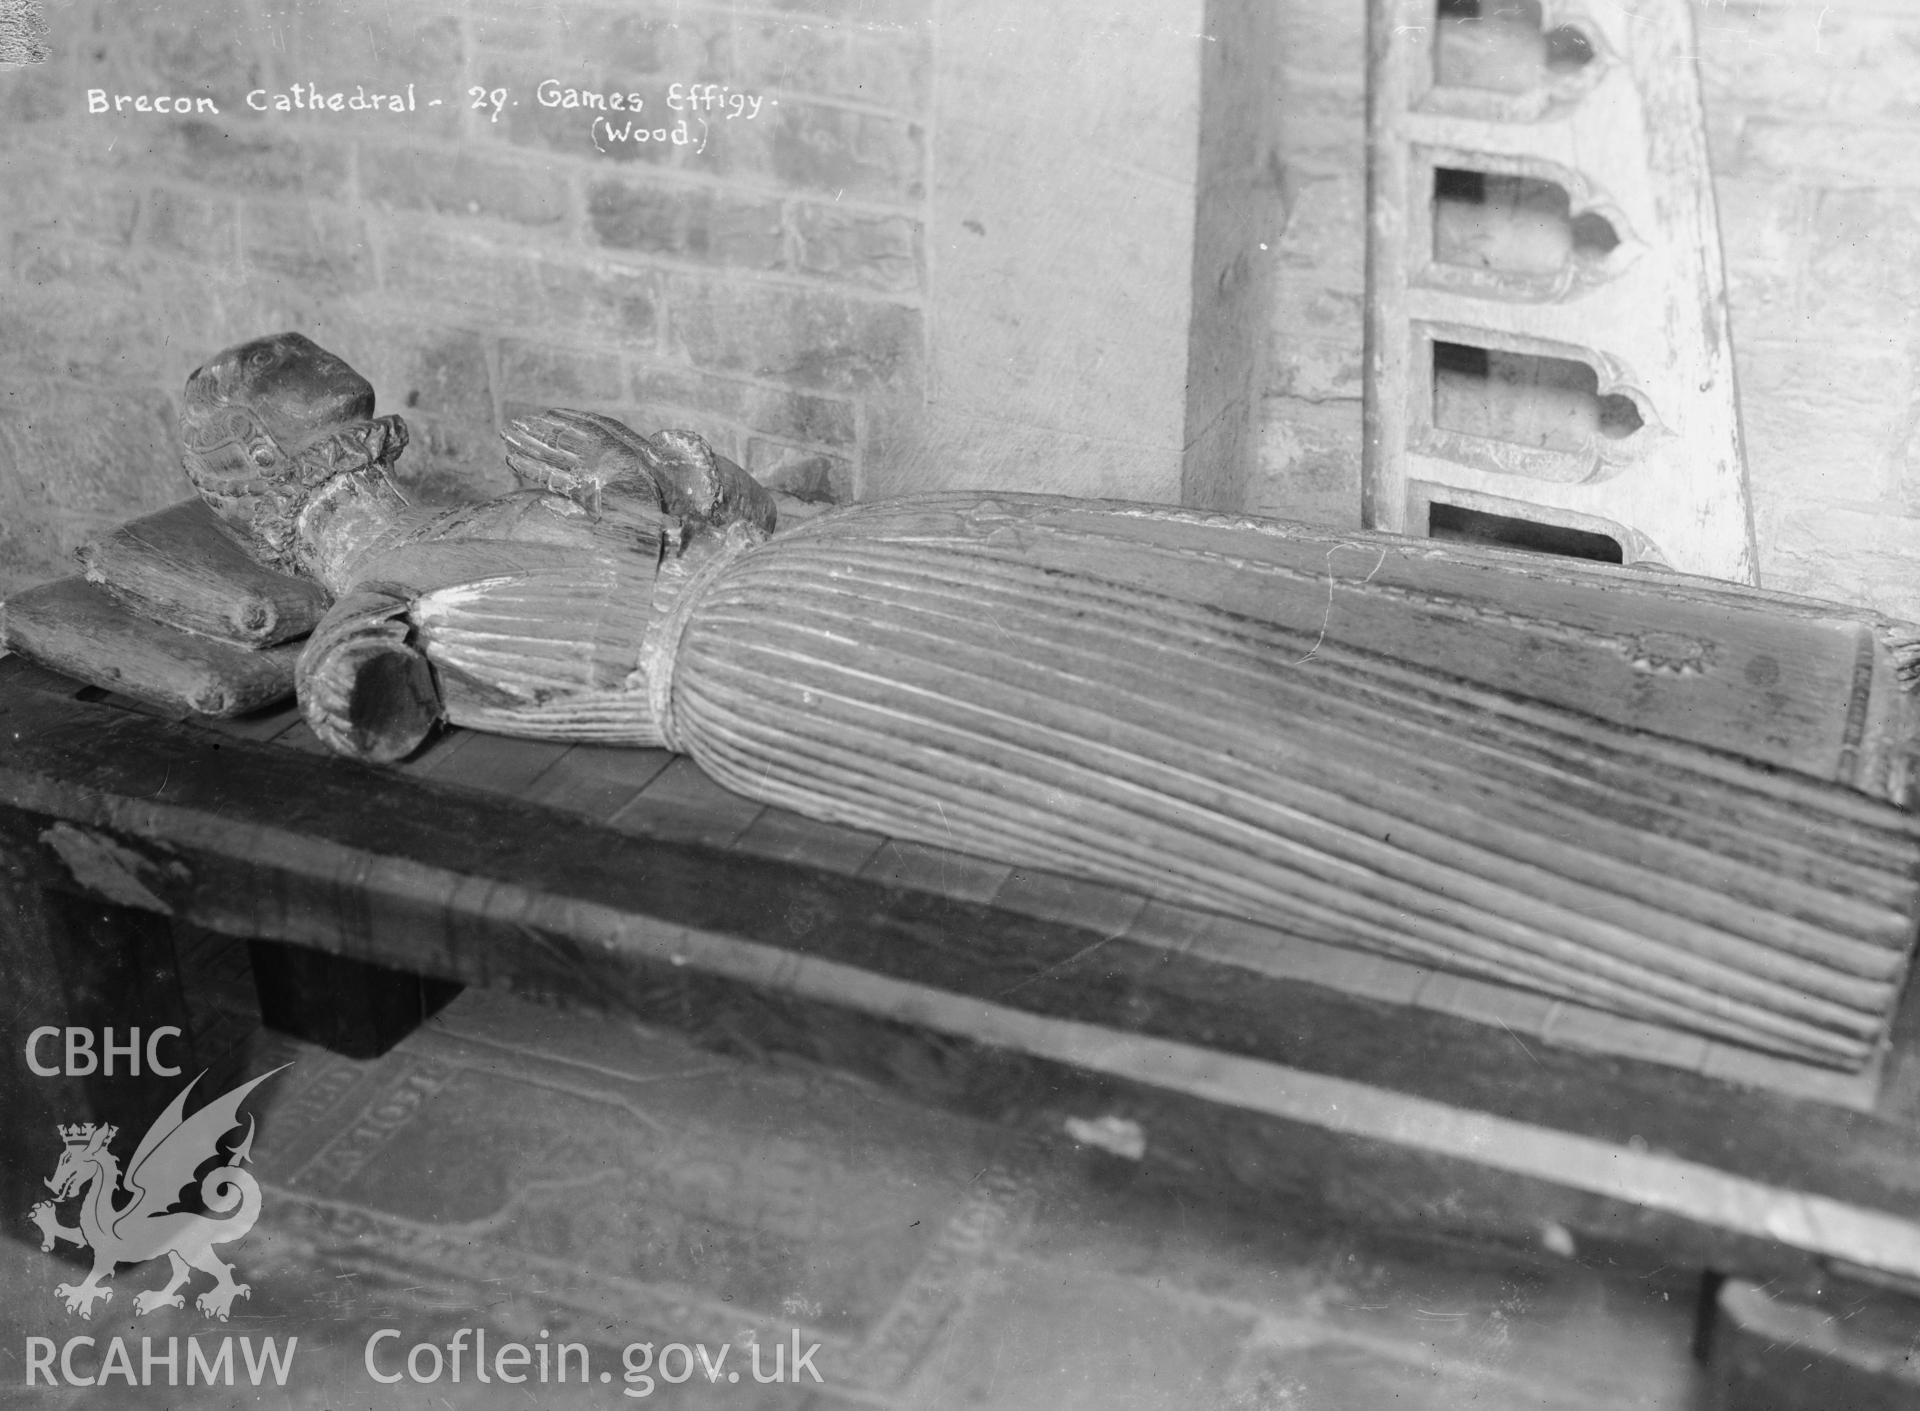 View of wooden effigy of member of 'Games Family' at Brecon Cathedral taken by W A Call.